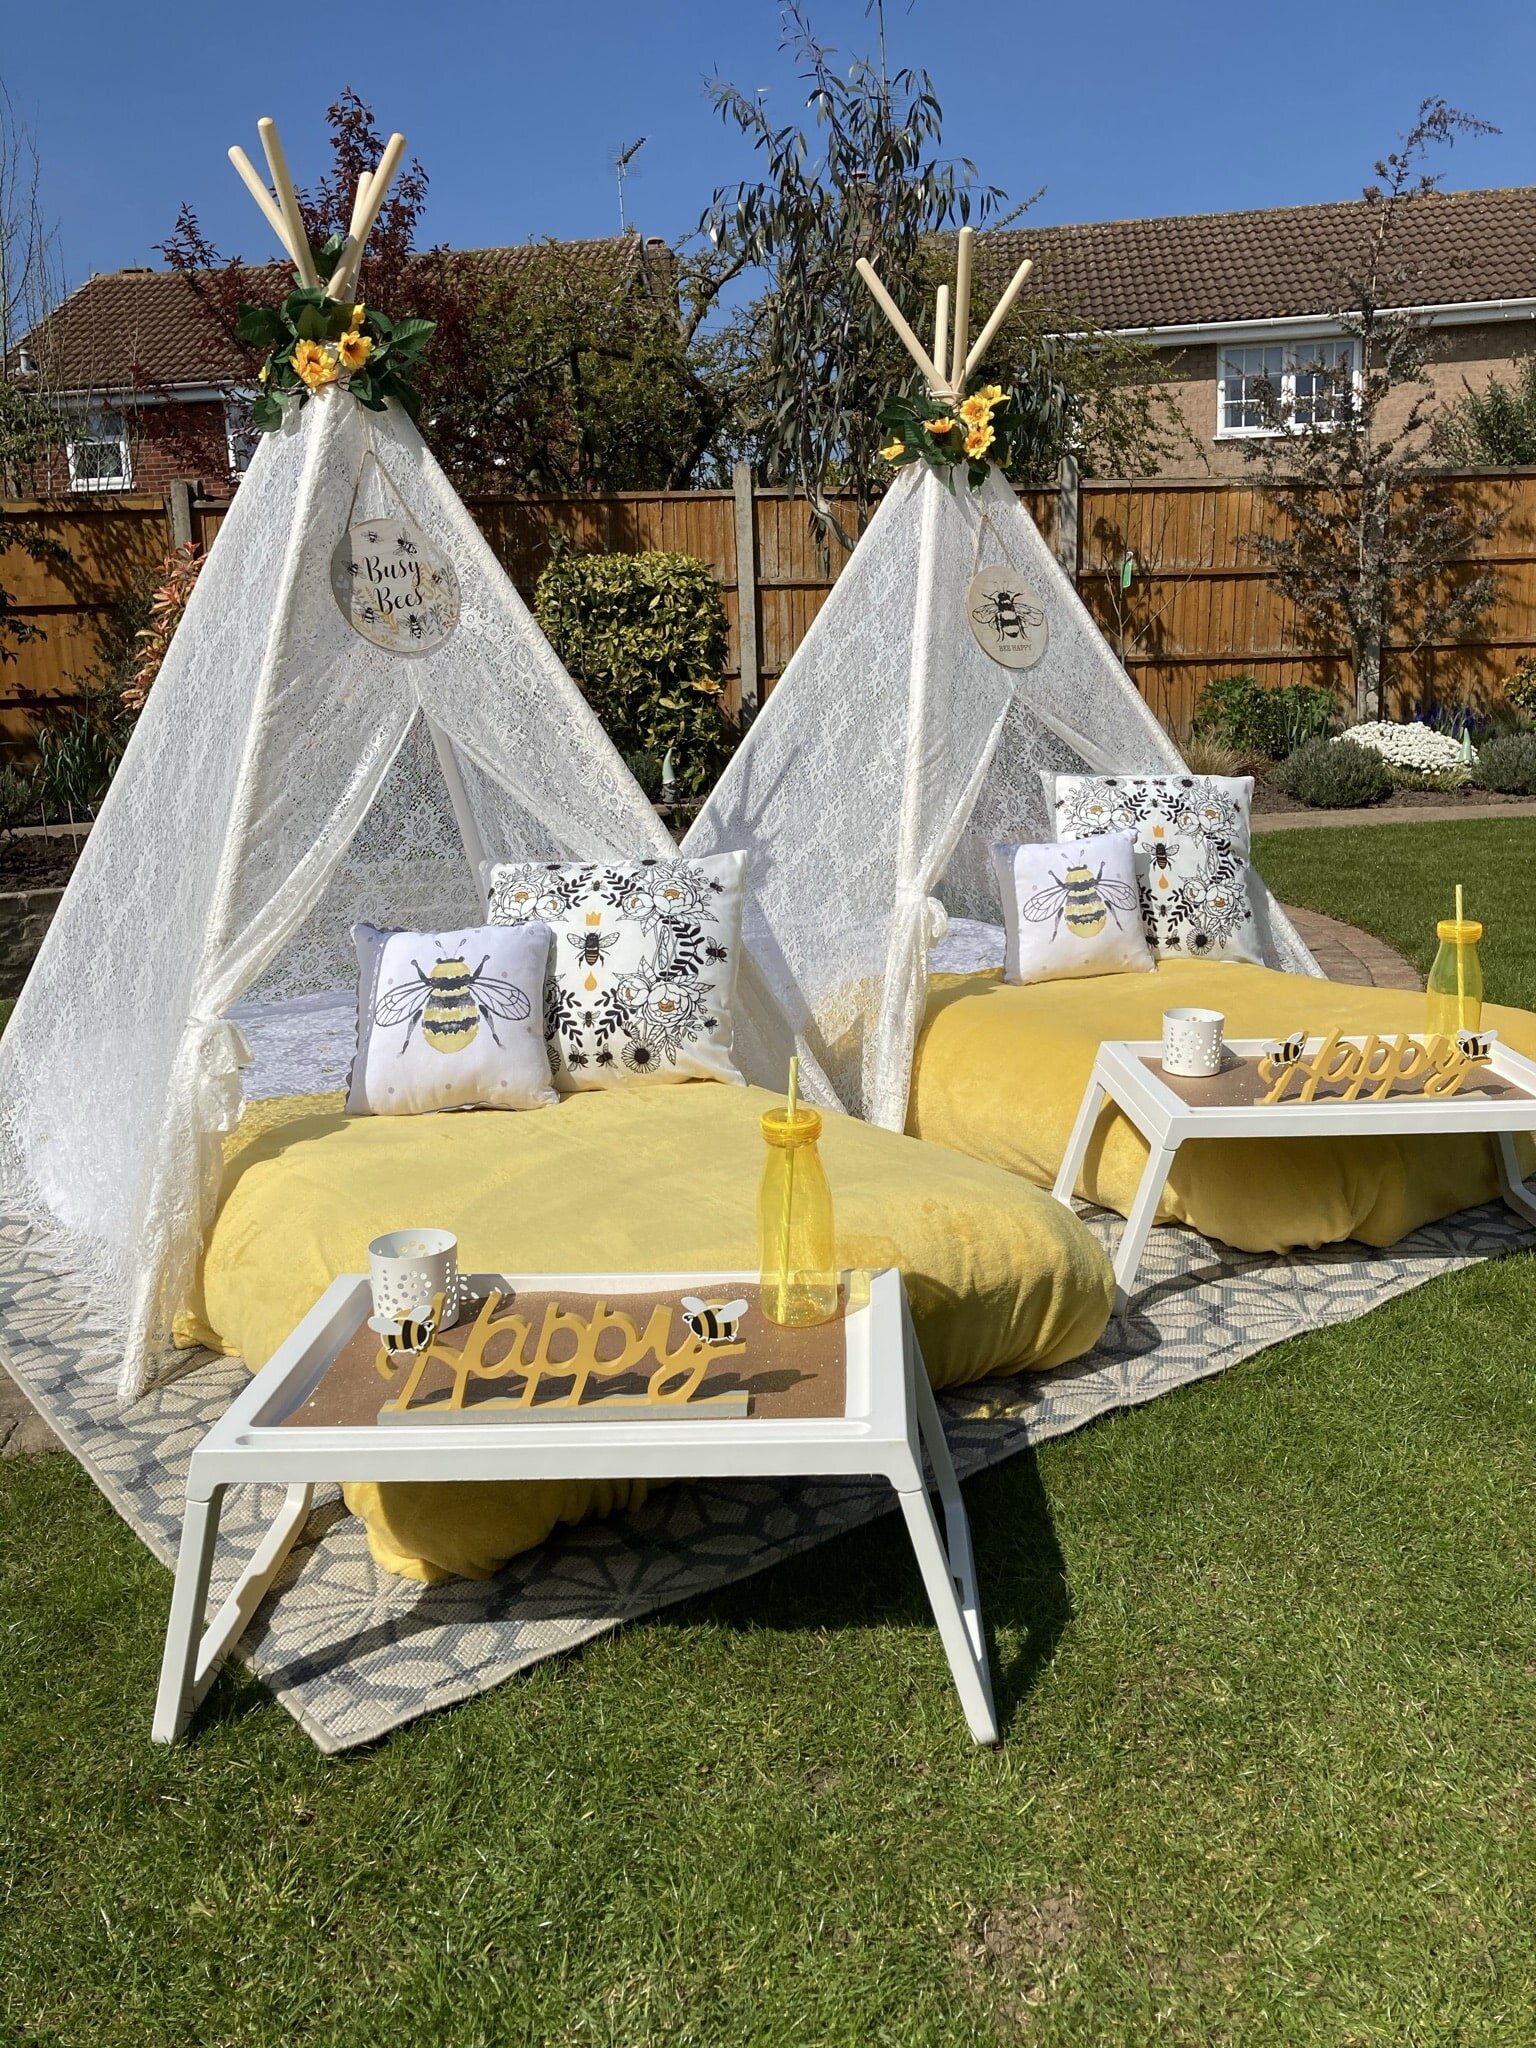 The Nottingham Sleepover Society - Sleepover Party Tents for hire in Nottinghamshire